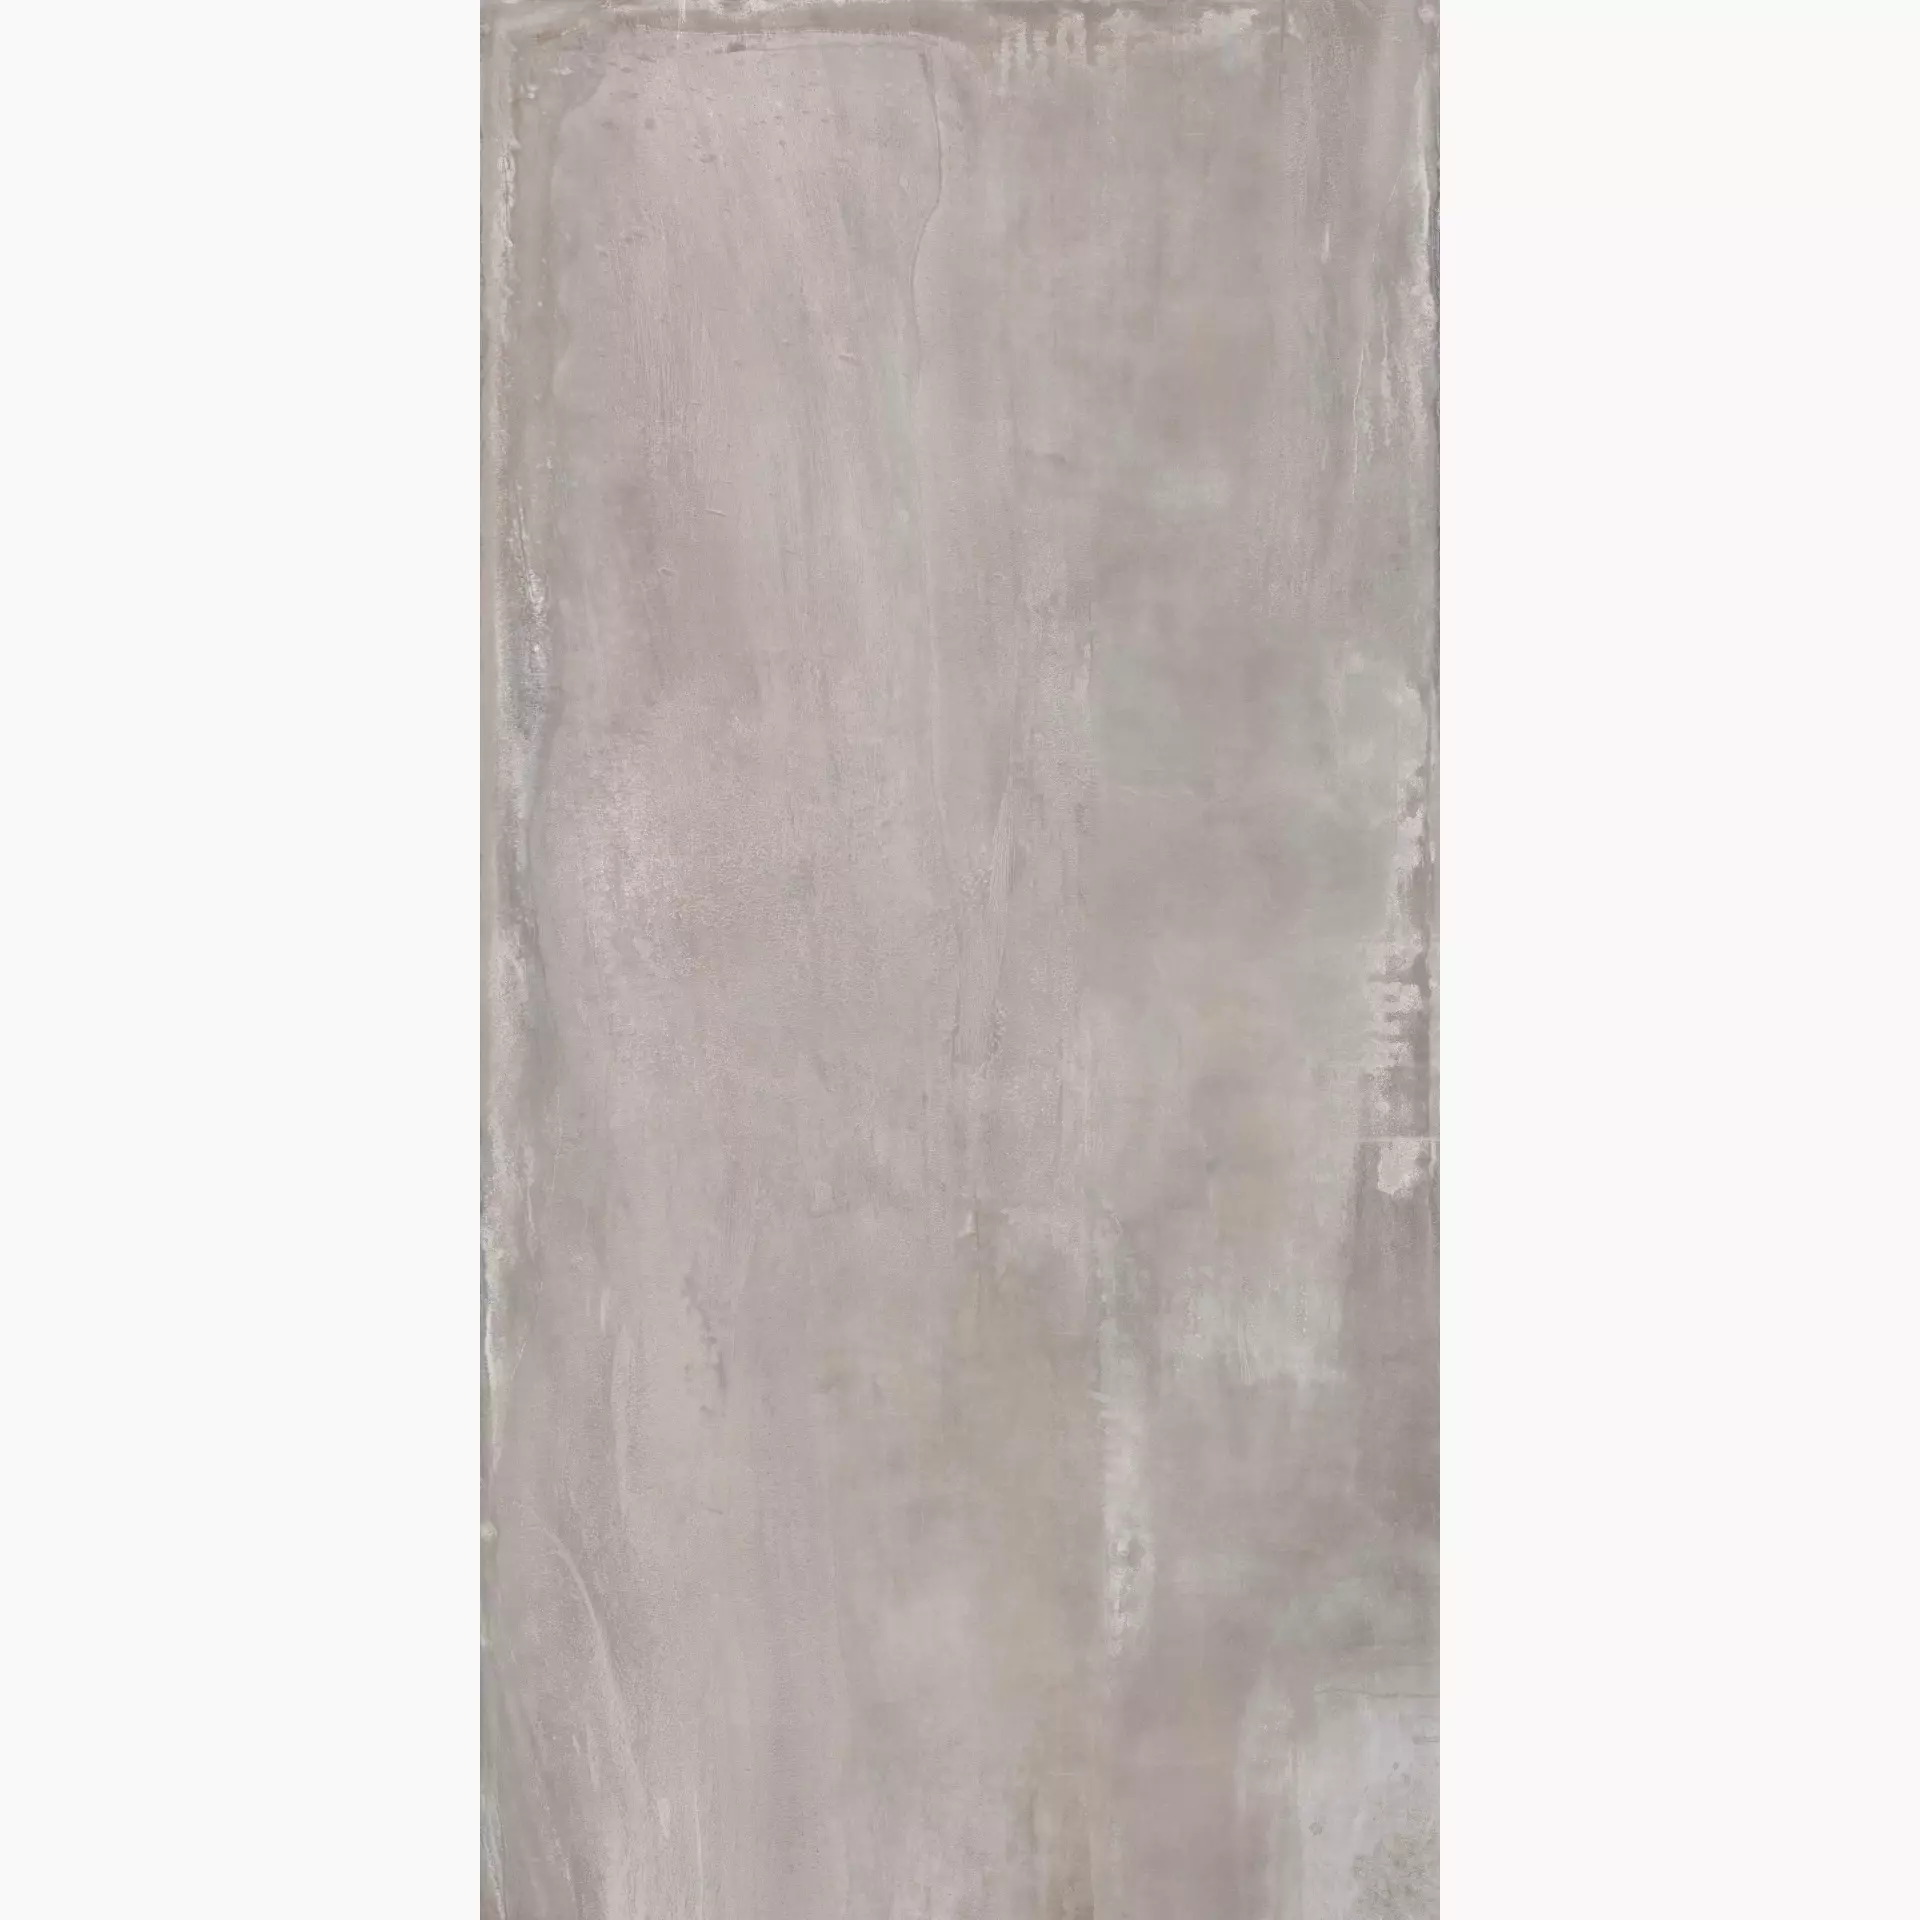 ABK Interno9 Wide Silver Naturale PF60000301 160x320cm rectified 6mm